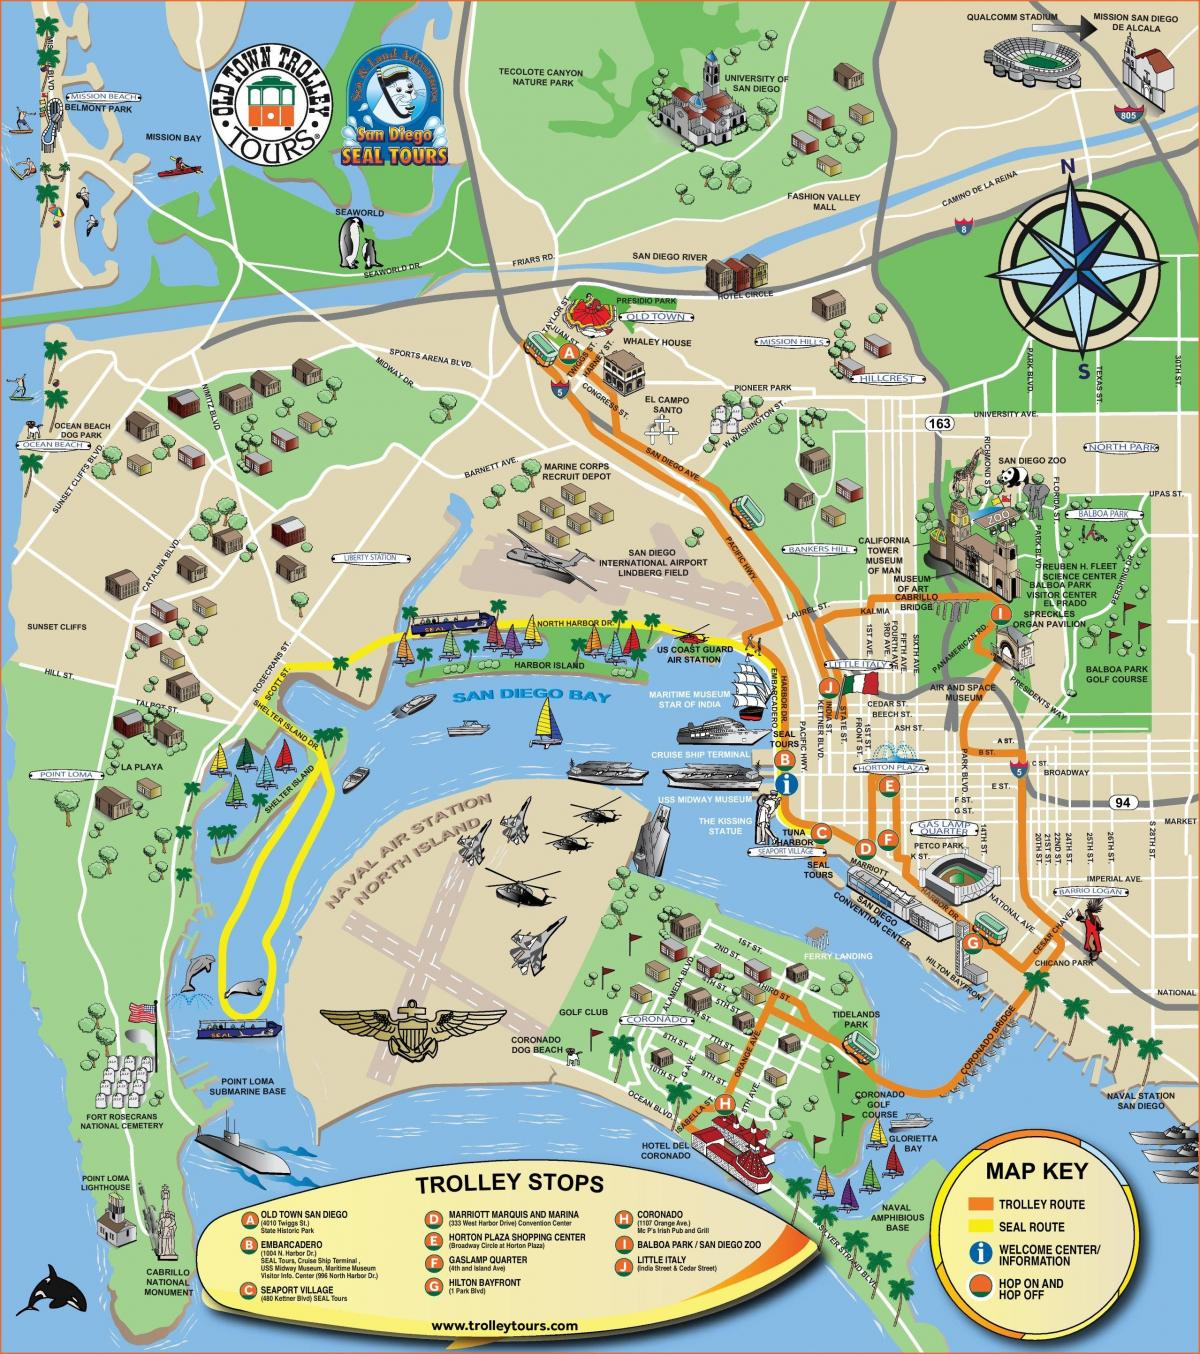 San Diego Sightseeing Map - San Diego Tourist Attractions Map - California Sightseeing Map